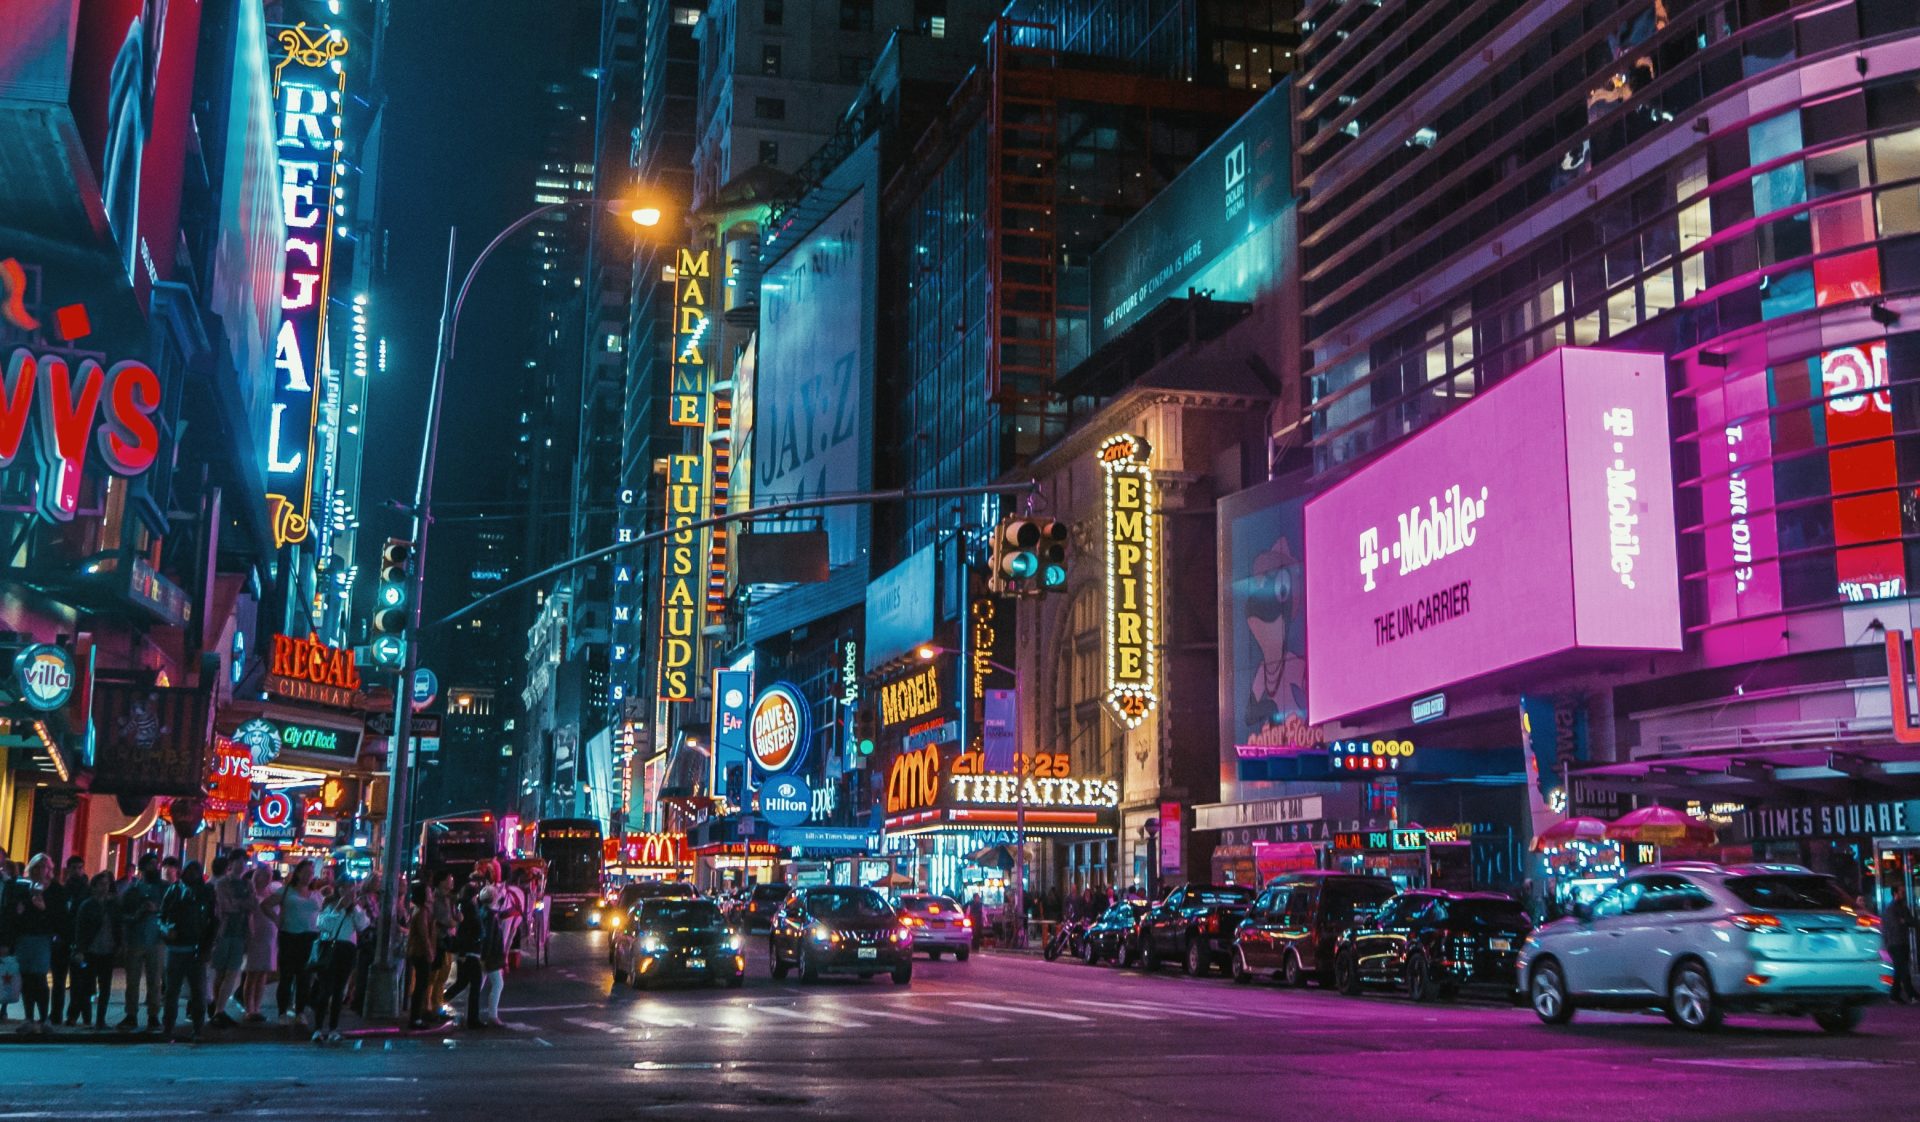 time square with a lot of ads and visible brand signs